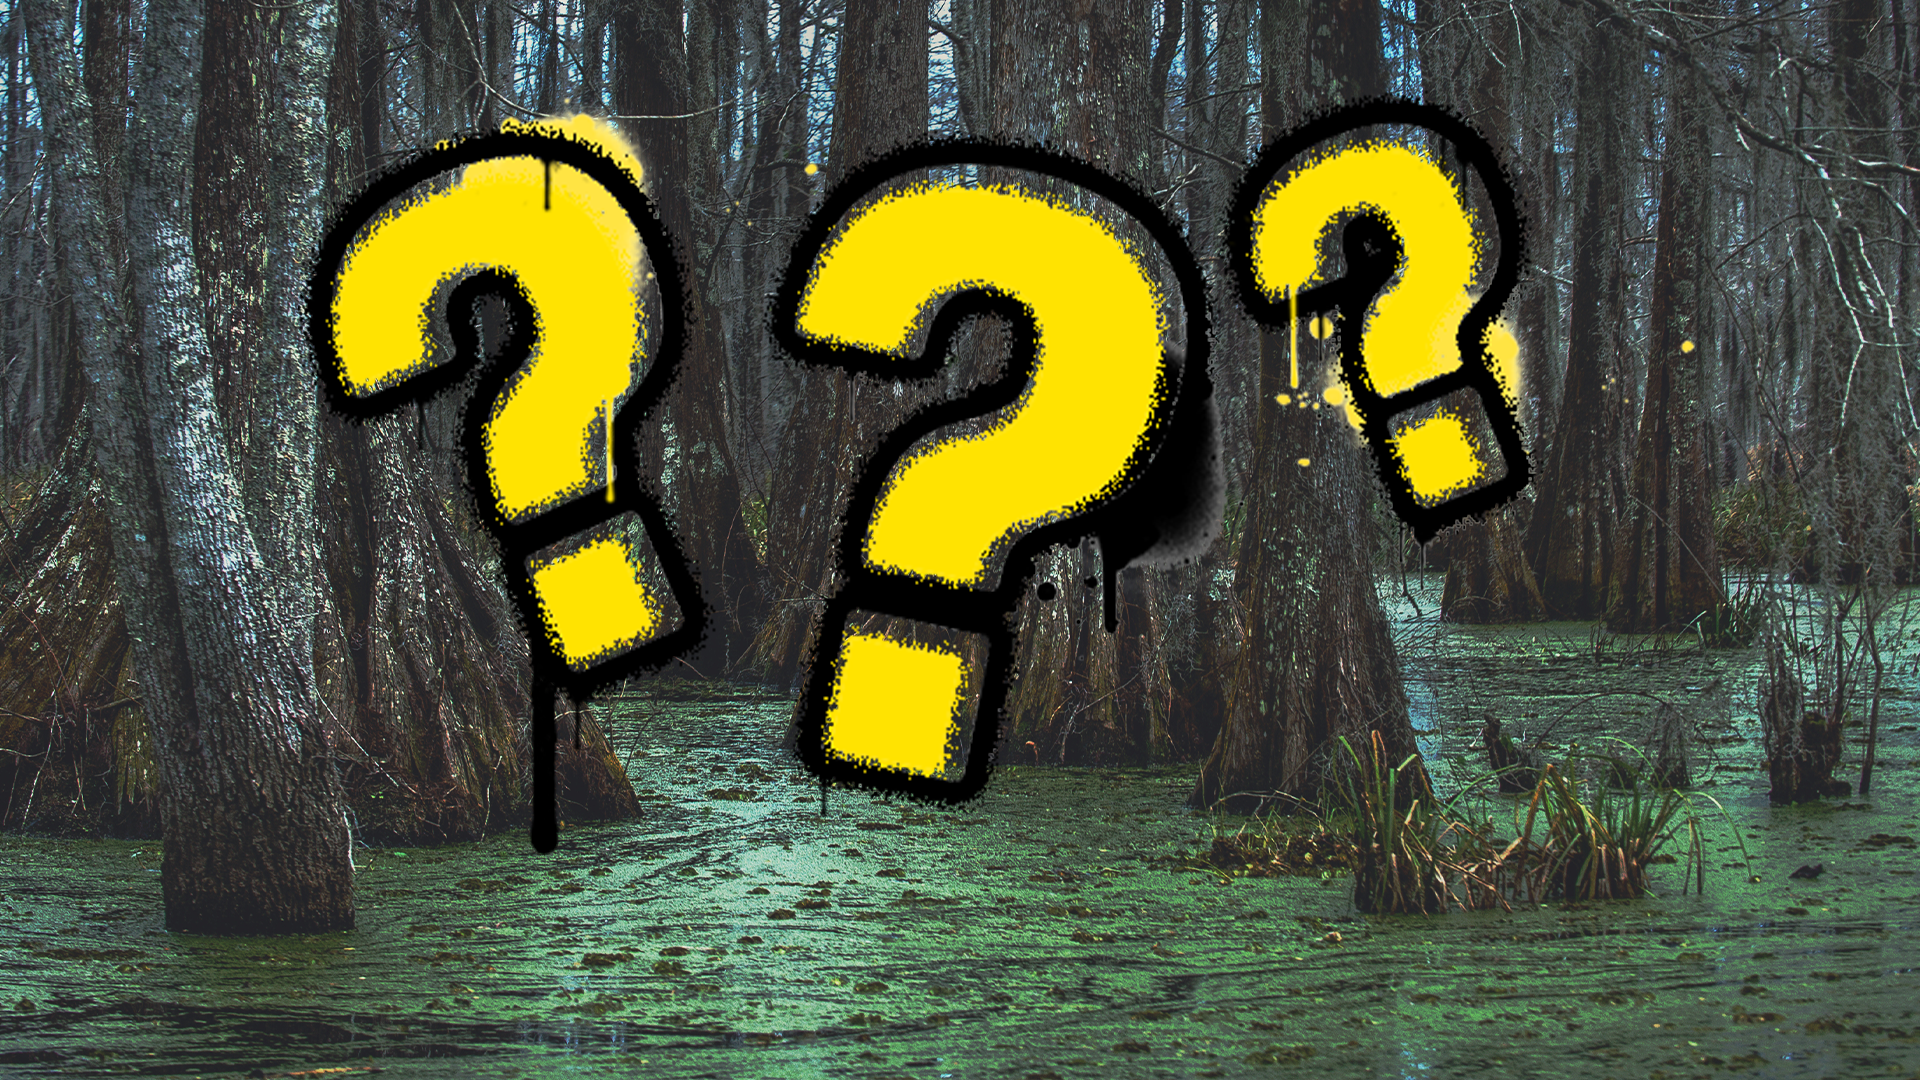 A swamp and question marks